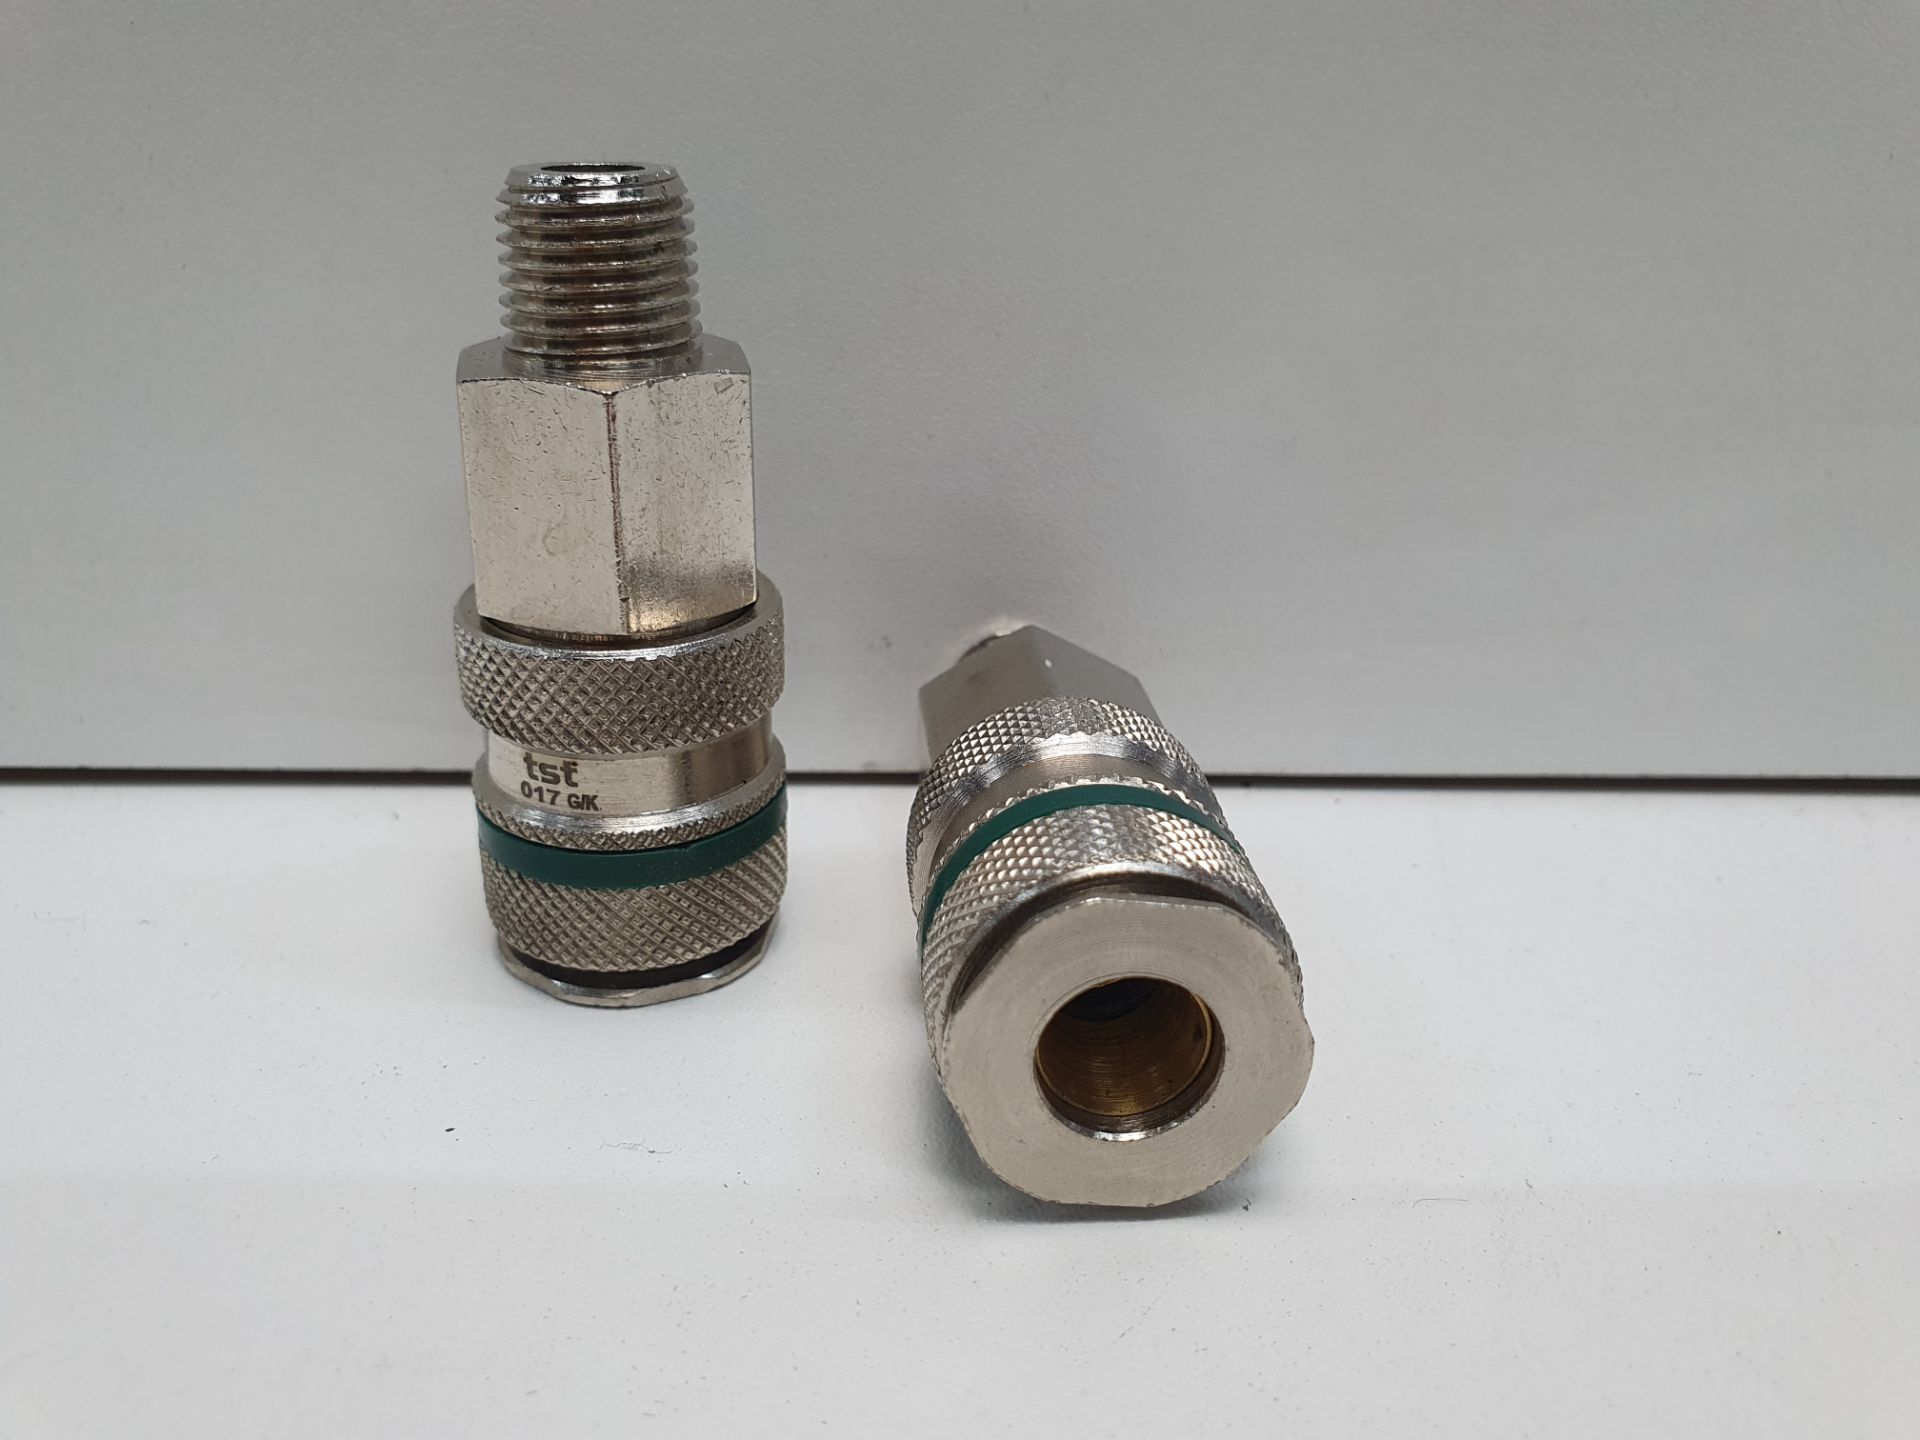 19 x Pneumatic Quick Connect Coupling Brass, Steel 1/4 in Threaded